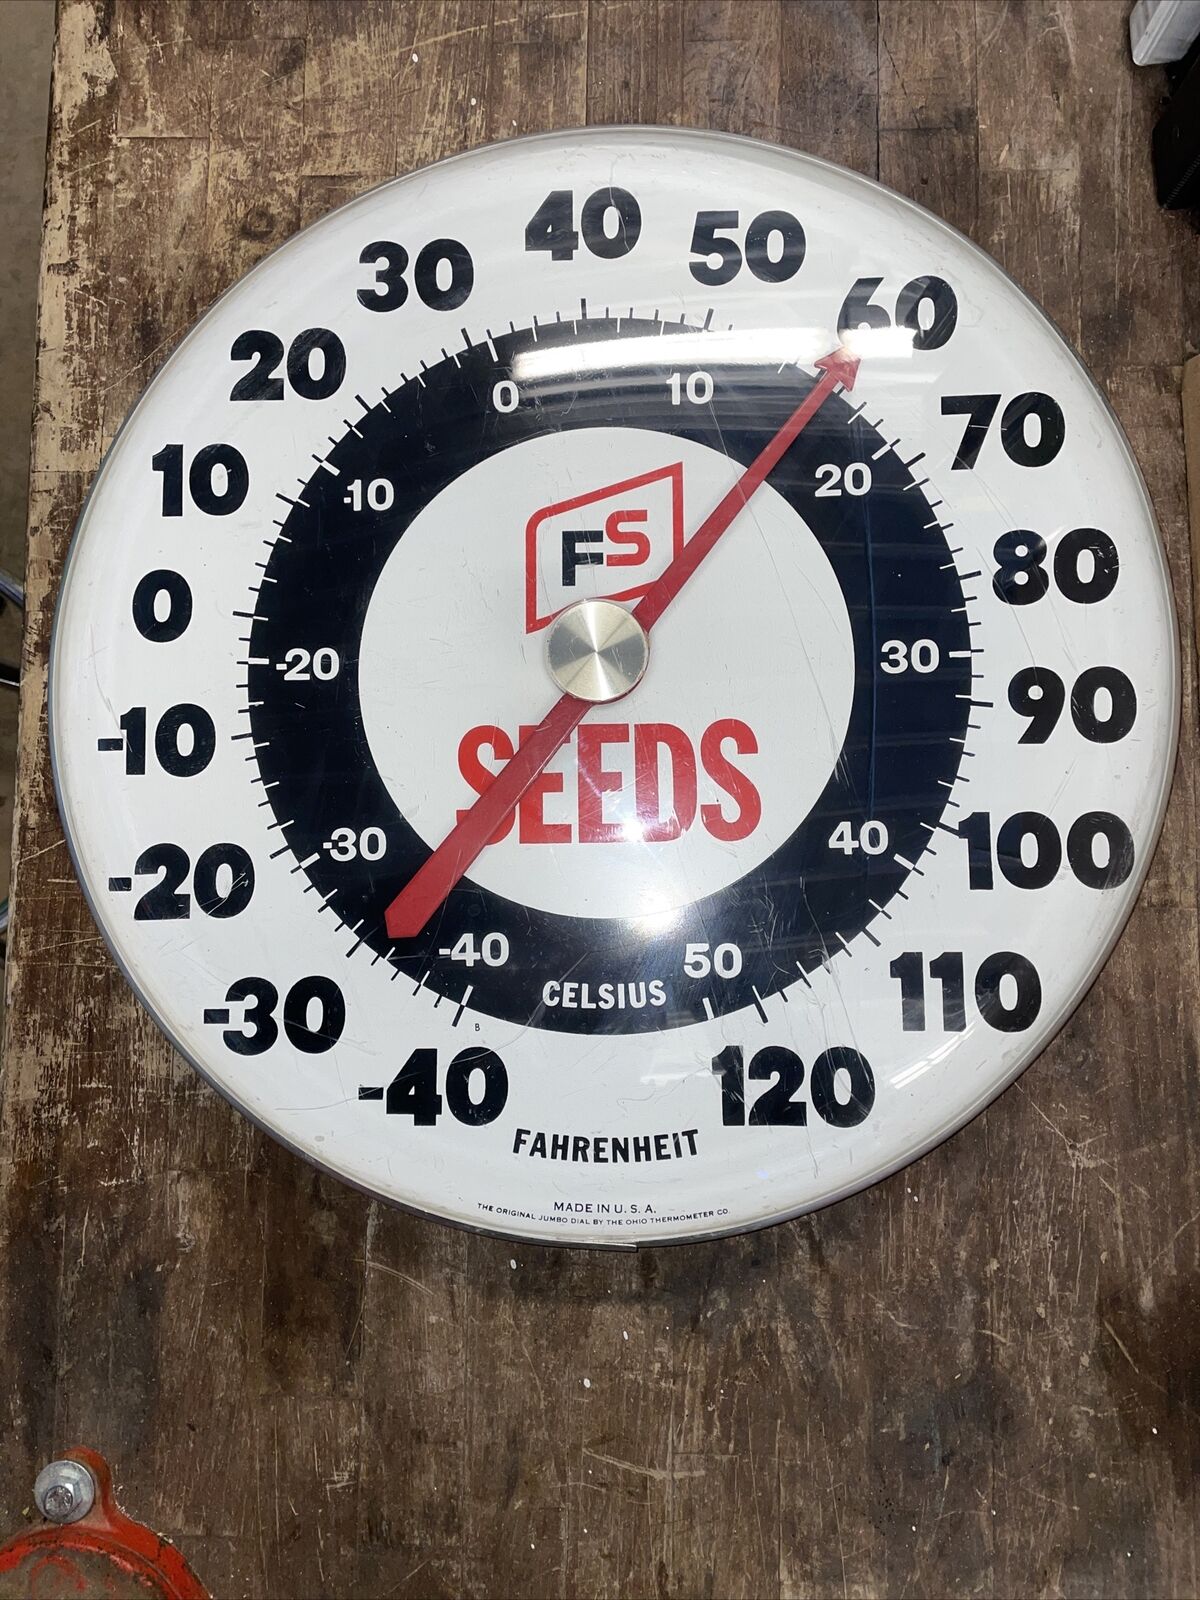 FS Seeds Thermometer